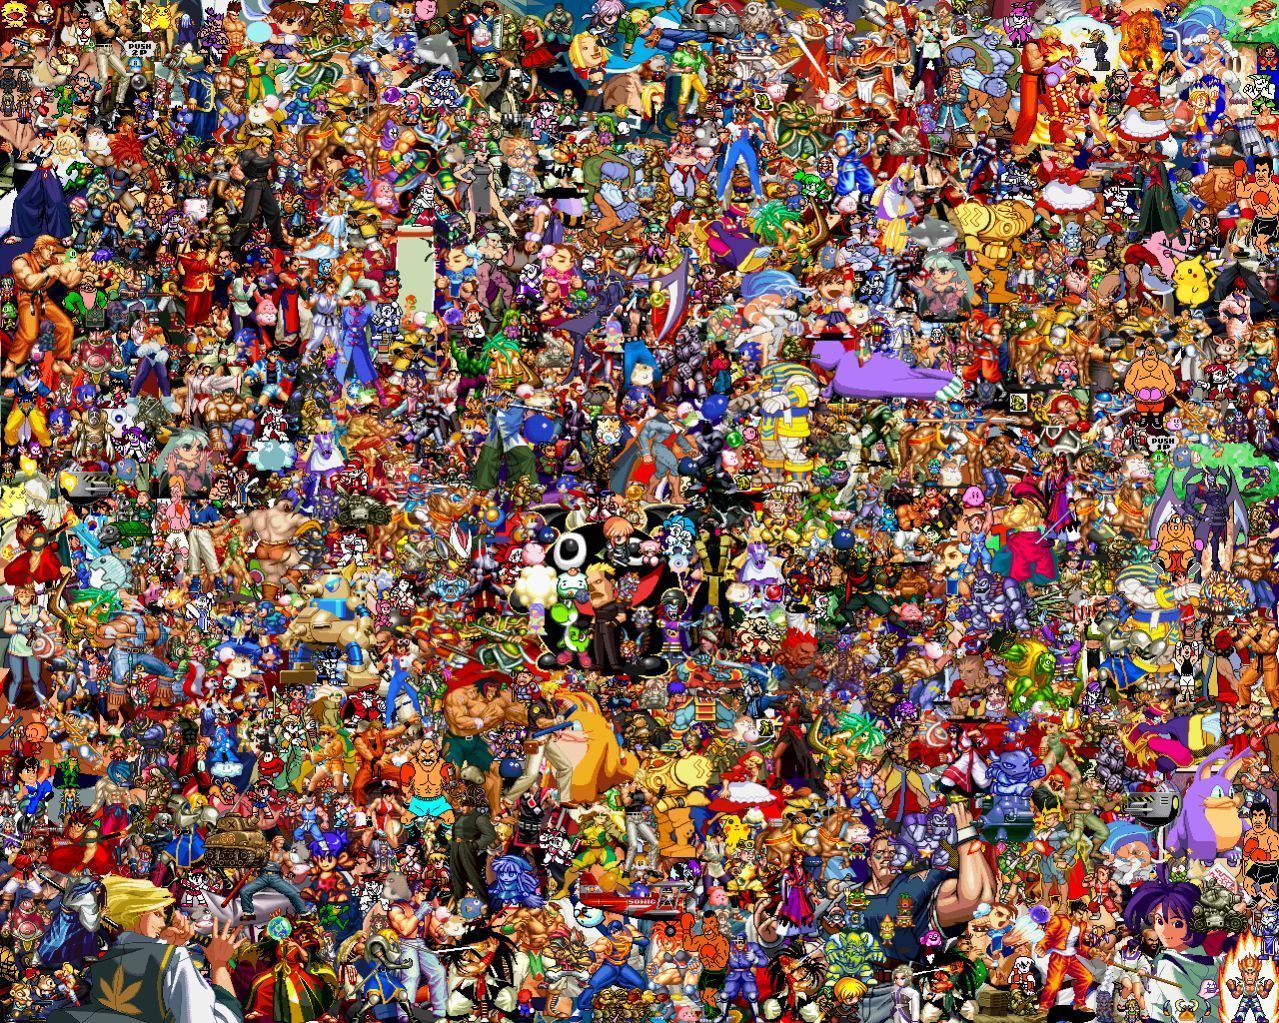 Every Video Game Sprite Ever in One Picture! Featuring Street Fighter, Final Fight, Pokemon, Mike Tyson Punch out, Mario, & Many More!. Sprite, Pixel art games, Pokemon video games